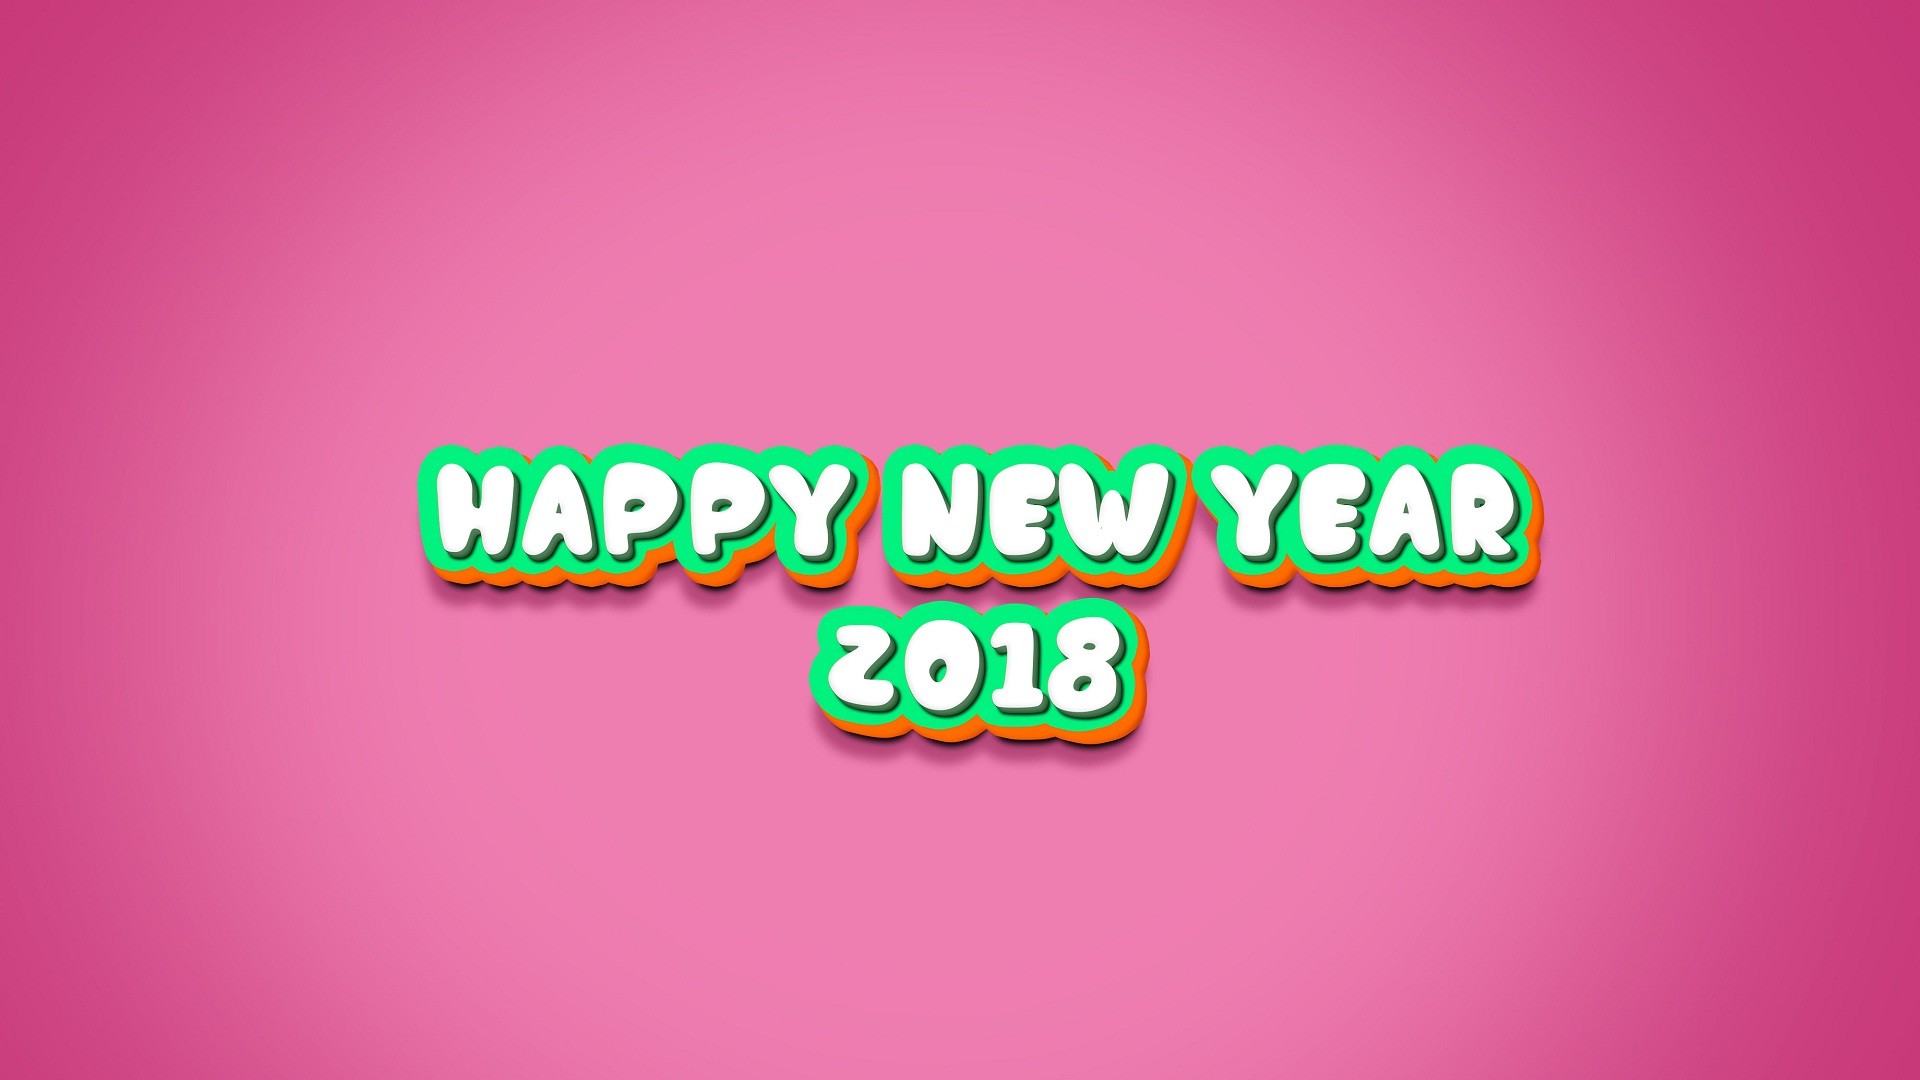 1920x1080 Happy New Year 2018 pink background wallpapers